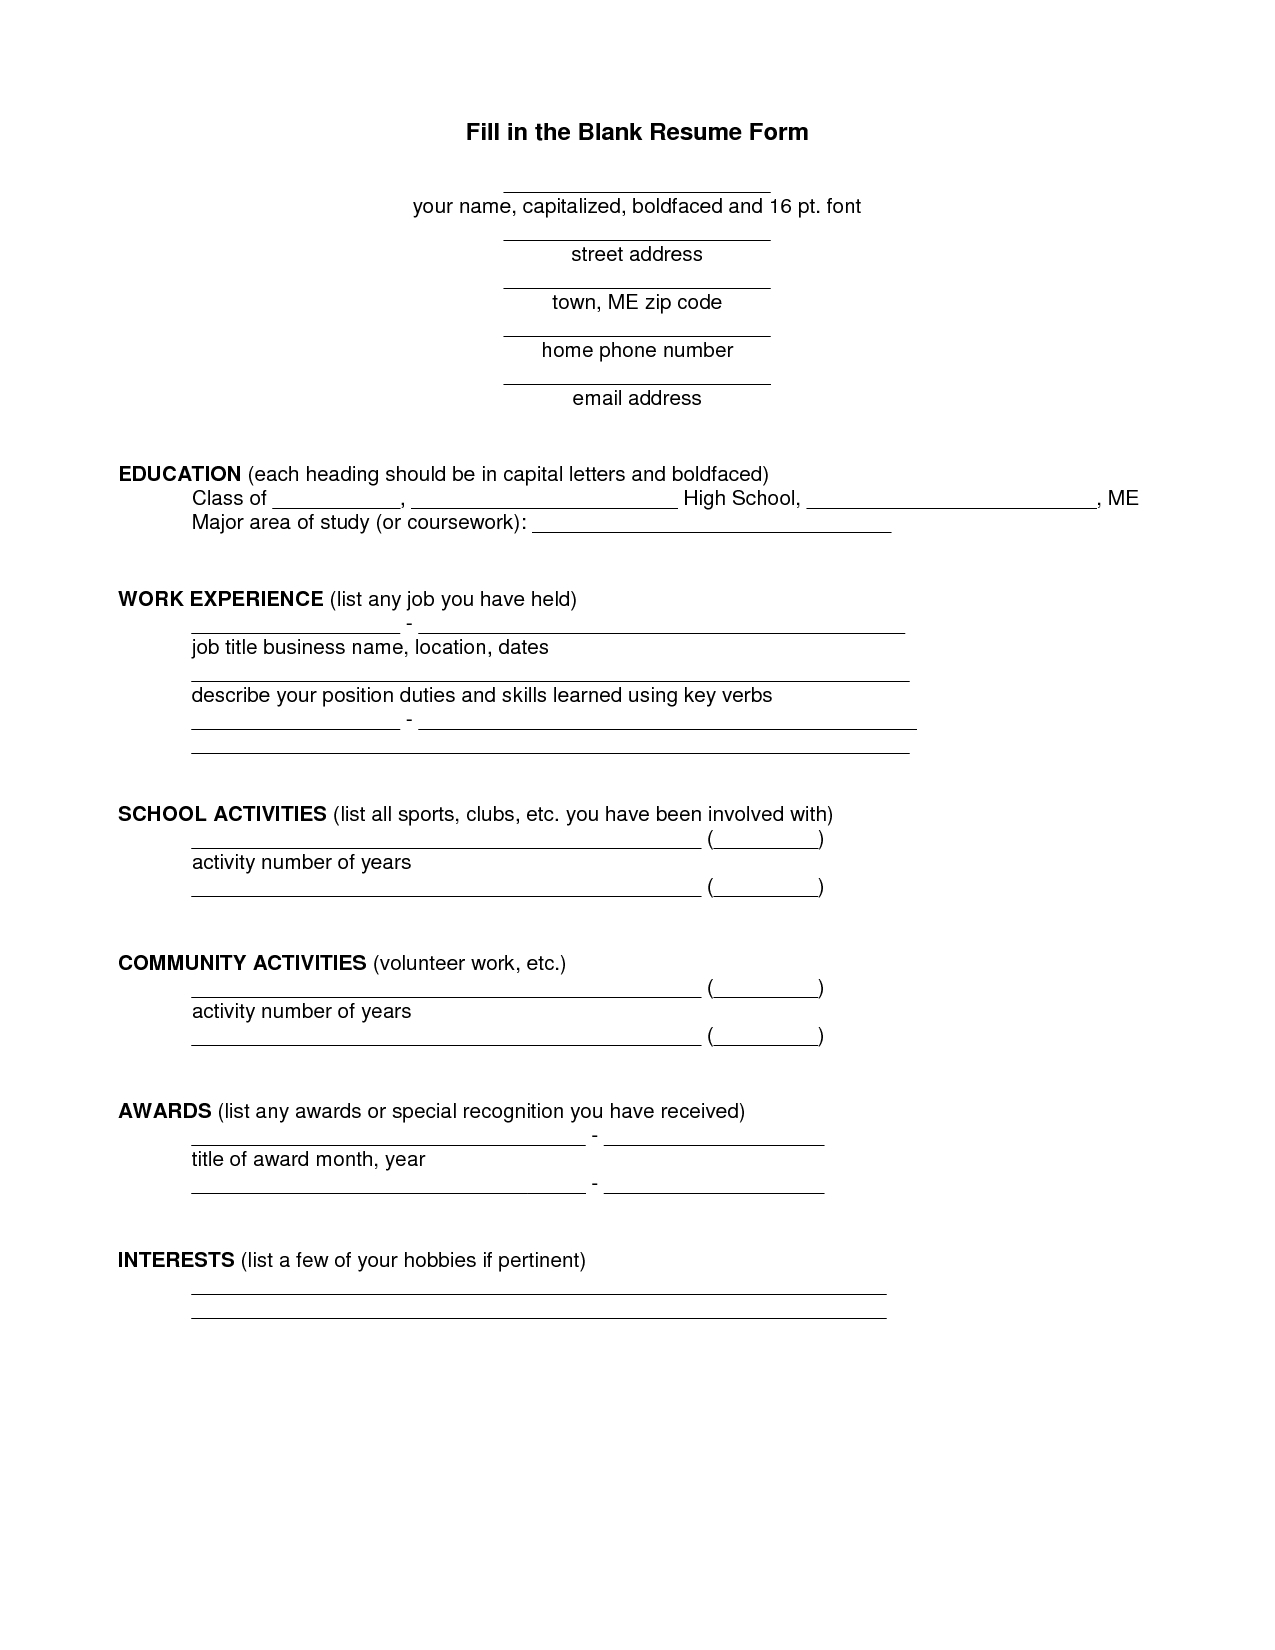 002 Template Ideas Resume Free Fill In The Blank Templates pertaining to Fill In The Blank Template